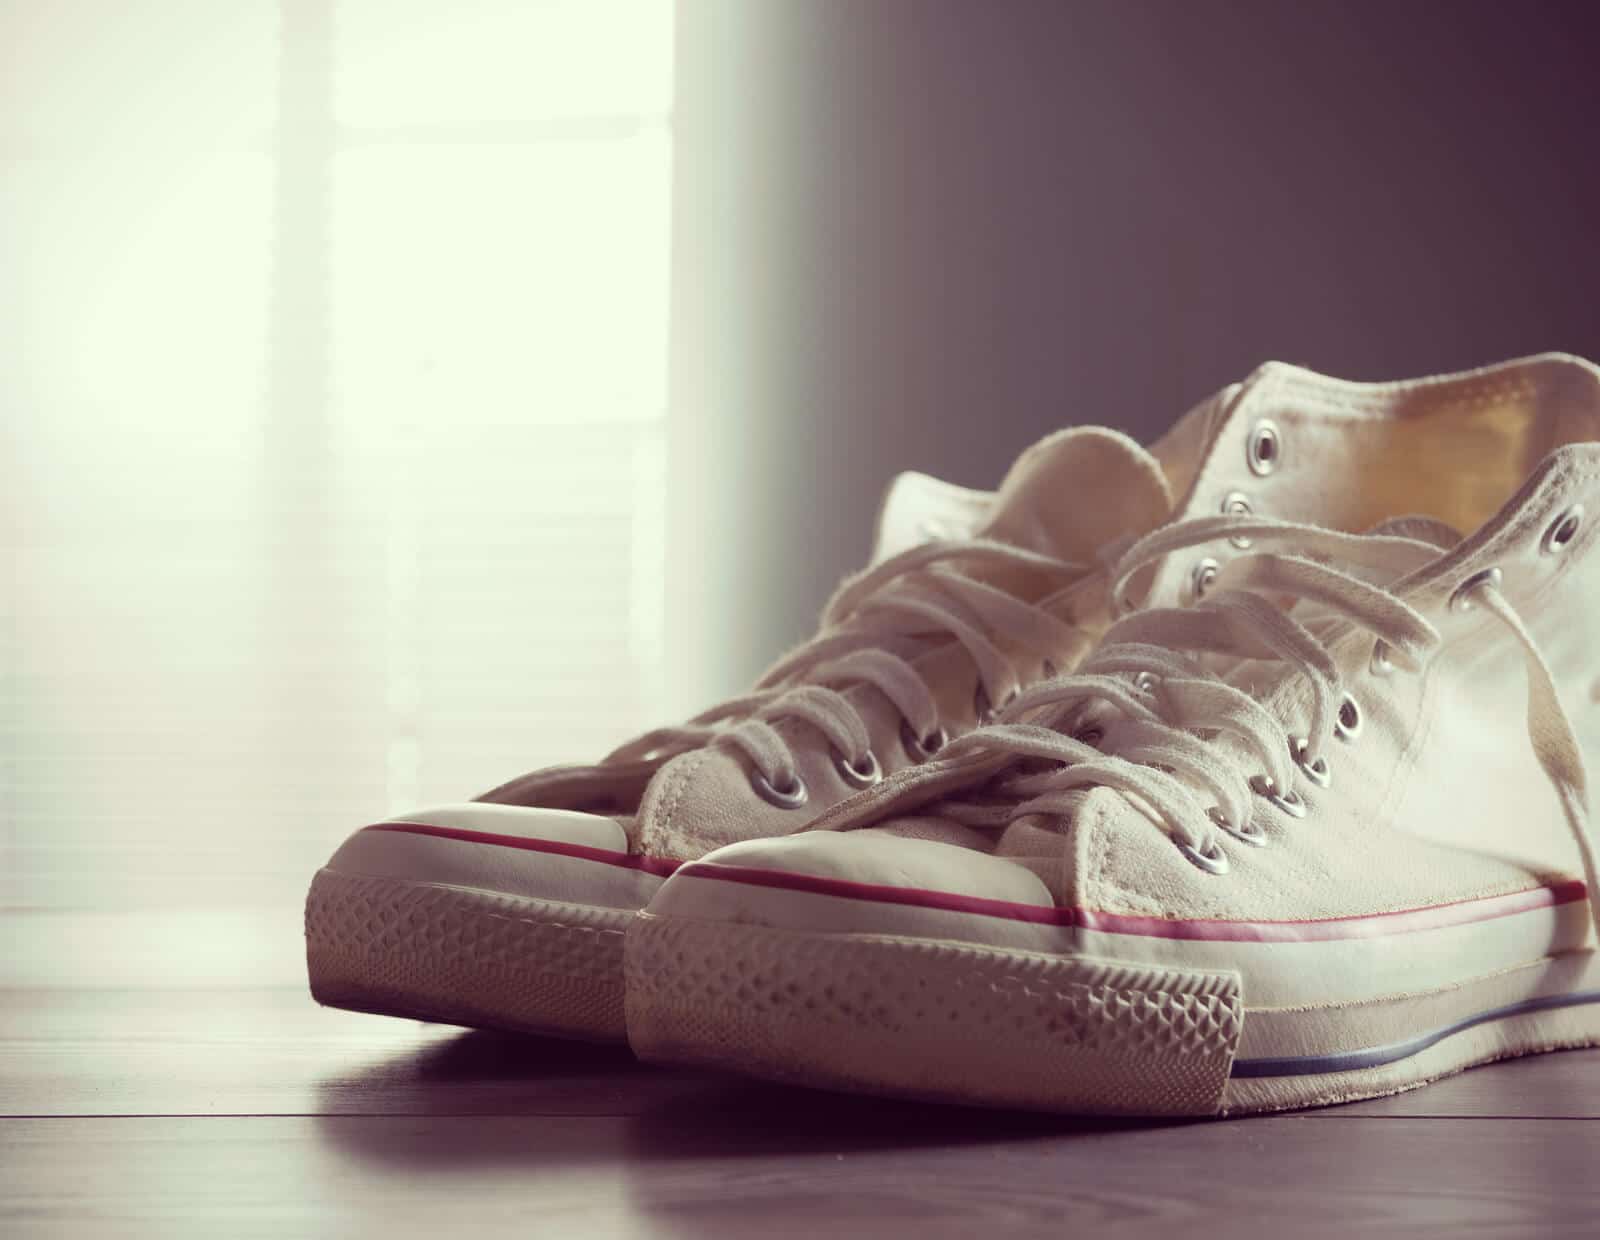 How To Clean Converse Sneakers With 5 Super Effective DIY Methods